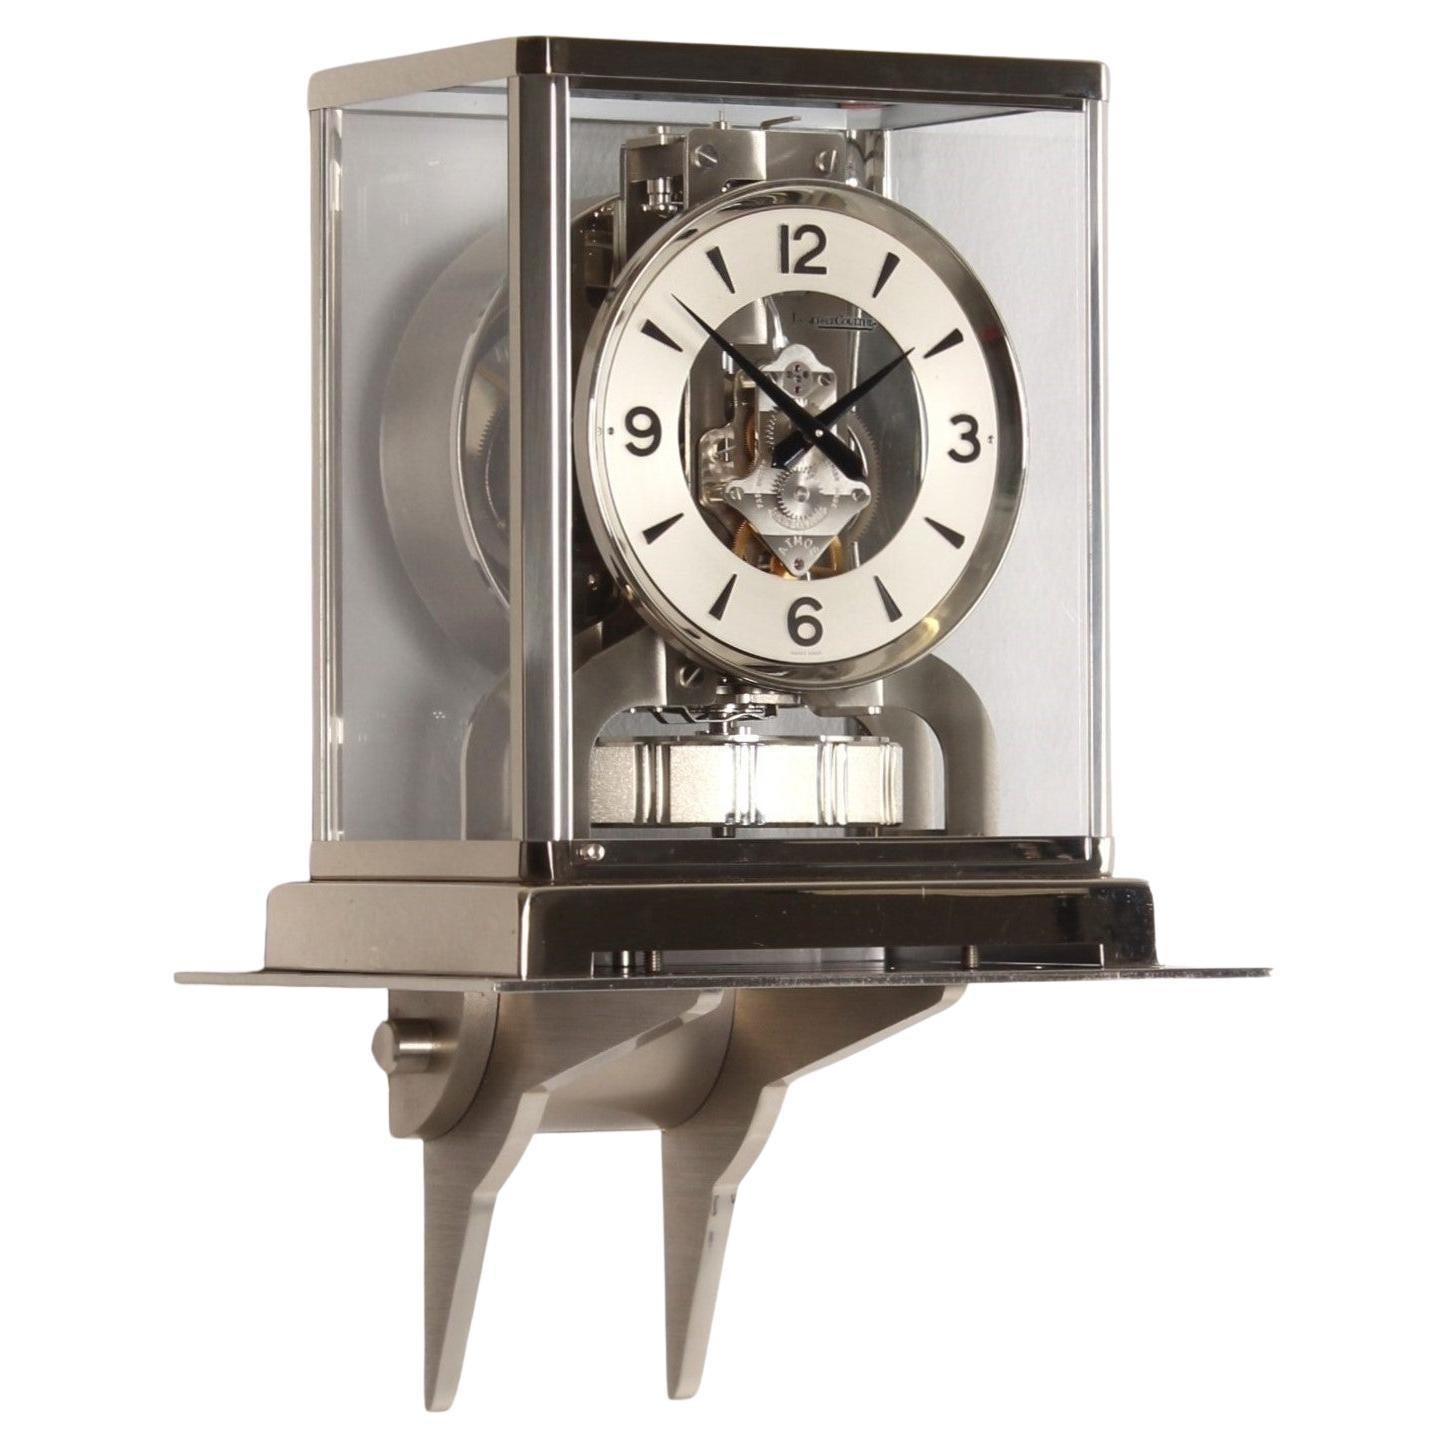 Original Silver Jaeger LeCoultre Atmos Clock with Console, from 1972